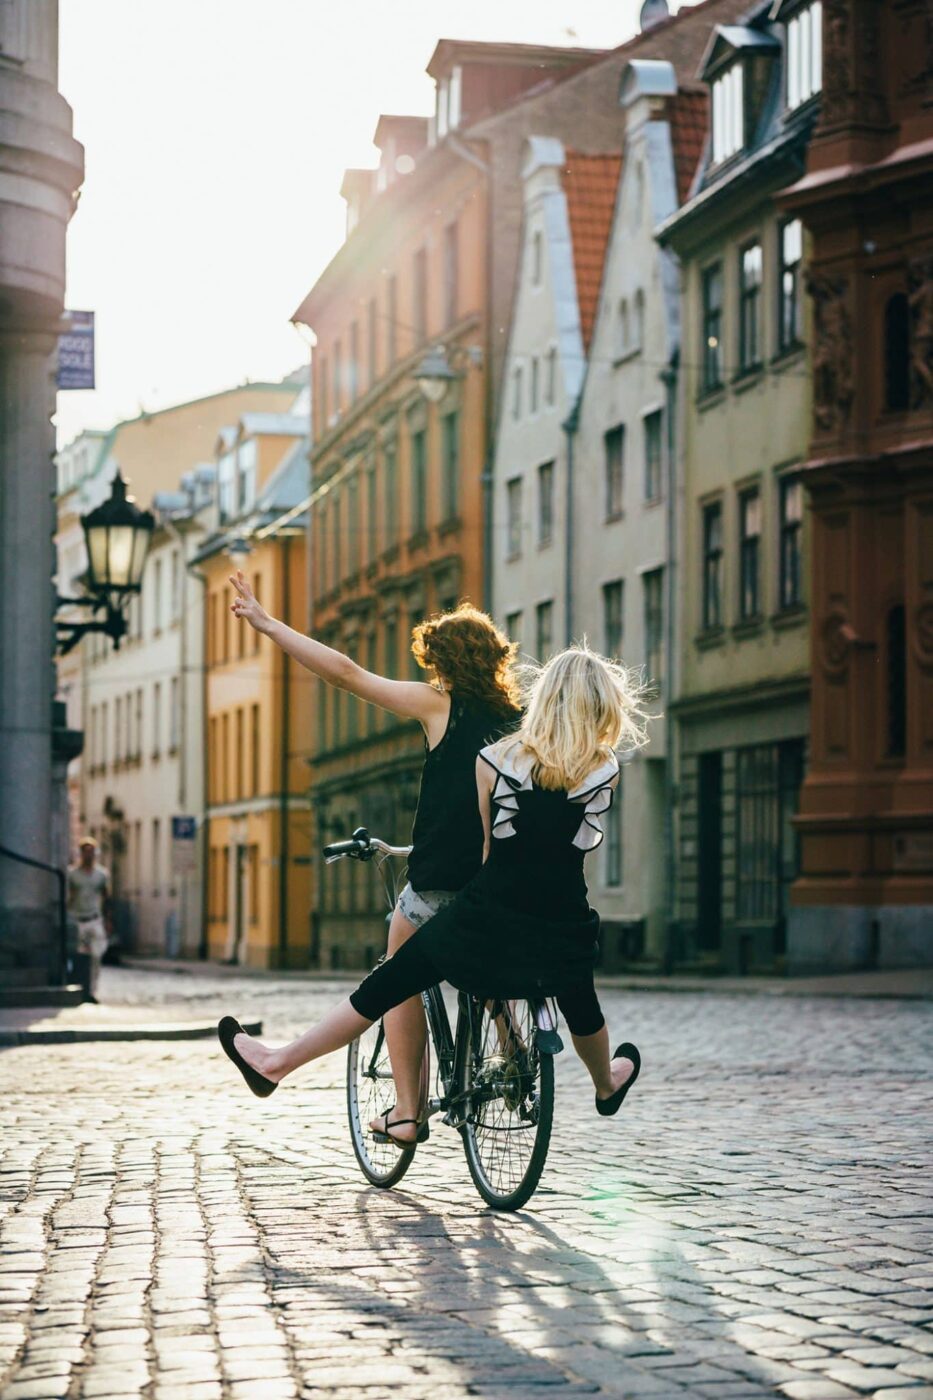 Girlfriends Havin Fun Around The City With Bicycle